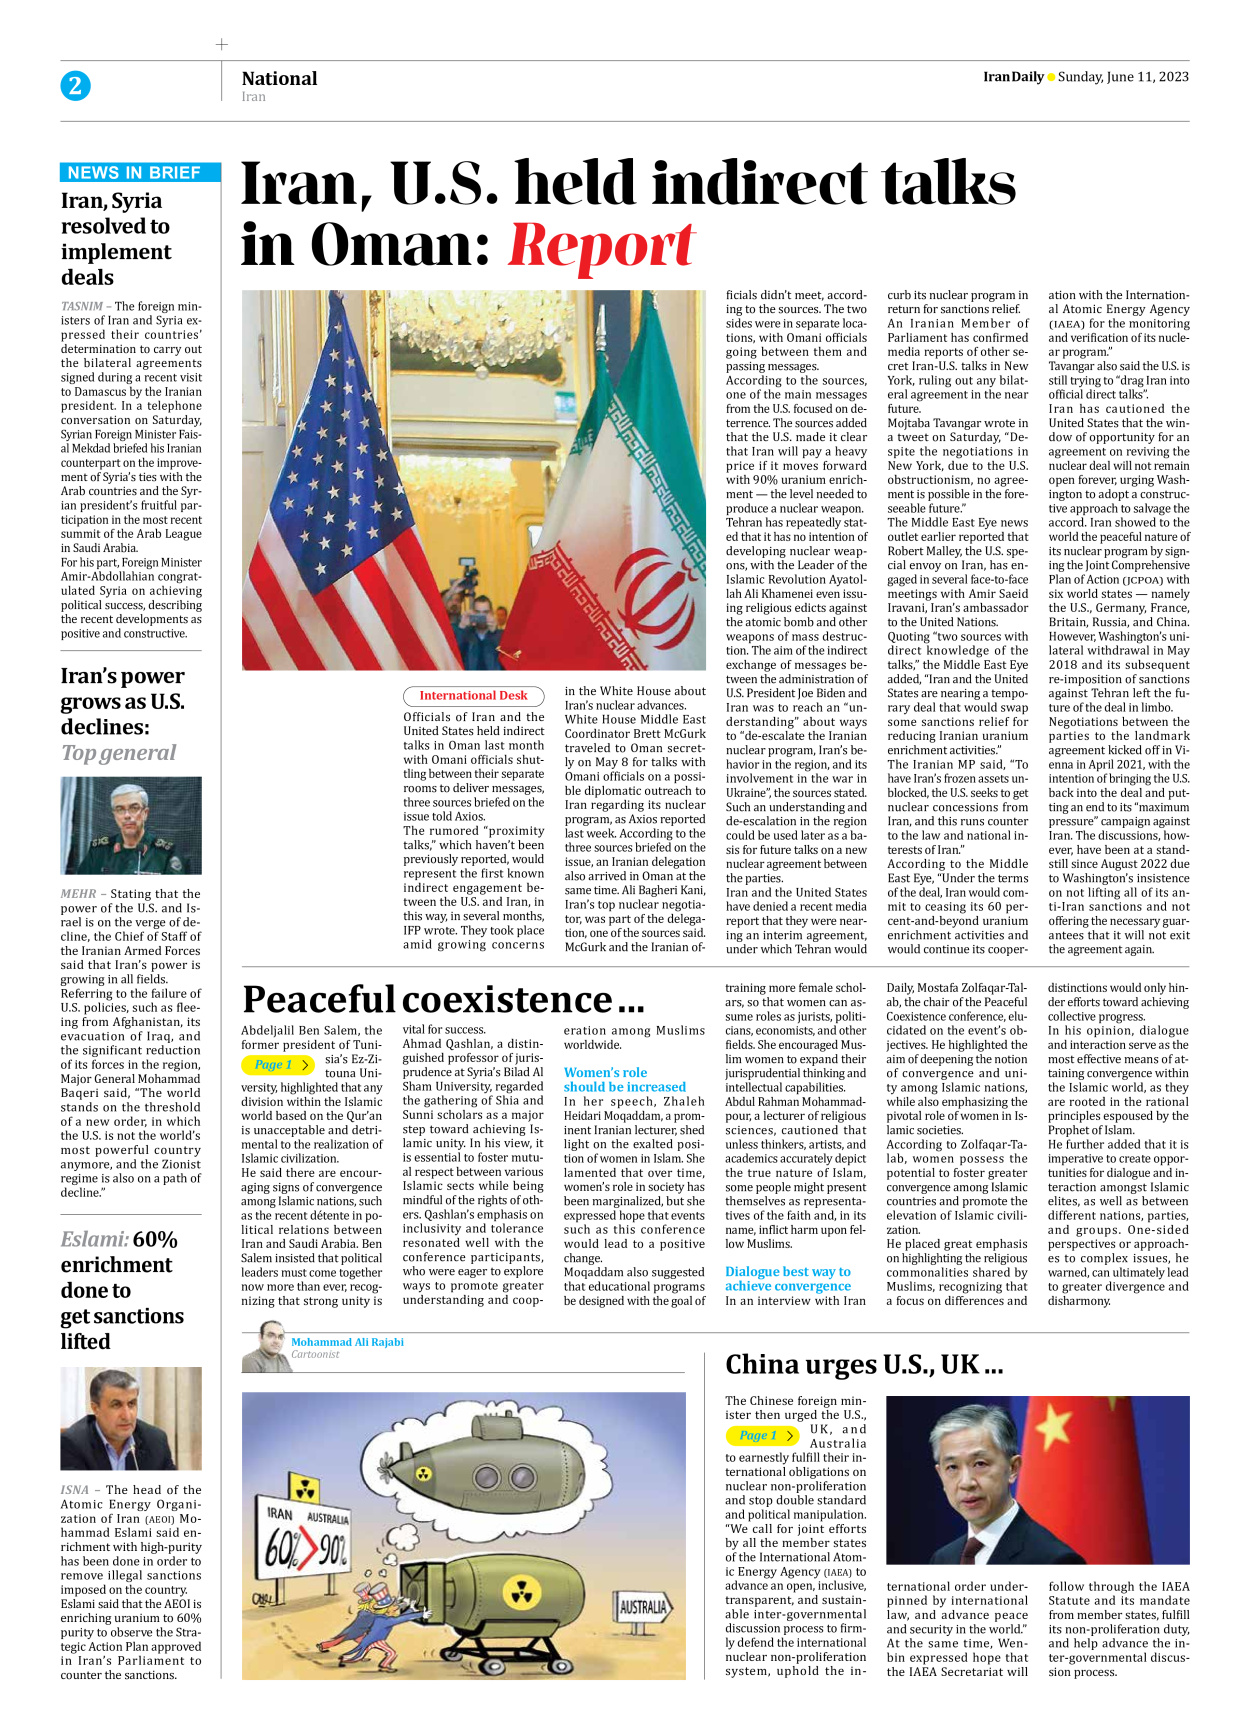 Iran Daily - Number Seven Thousand Three Hundred and Eleven - 11 June 2023 - Page 2